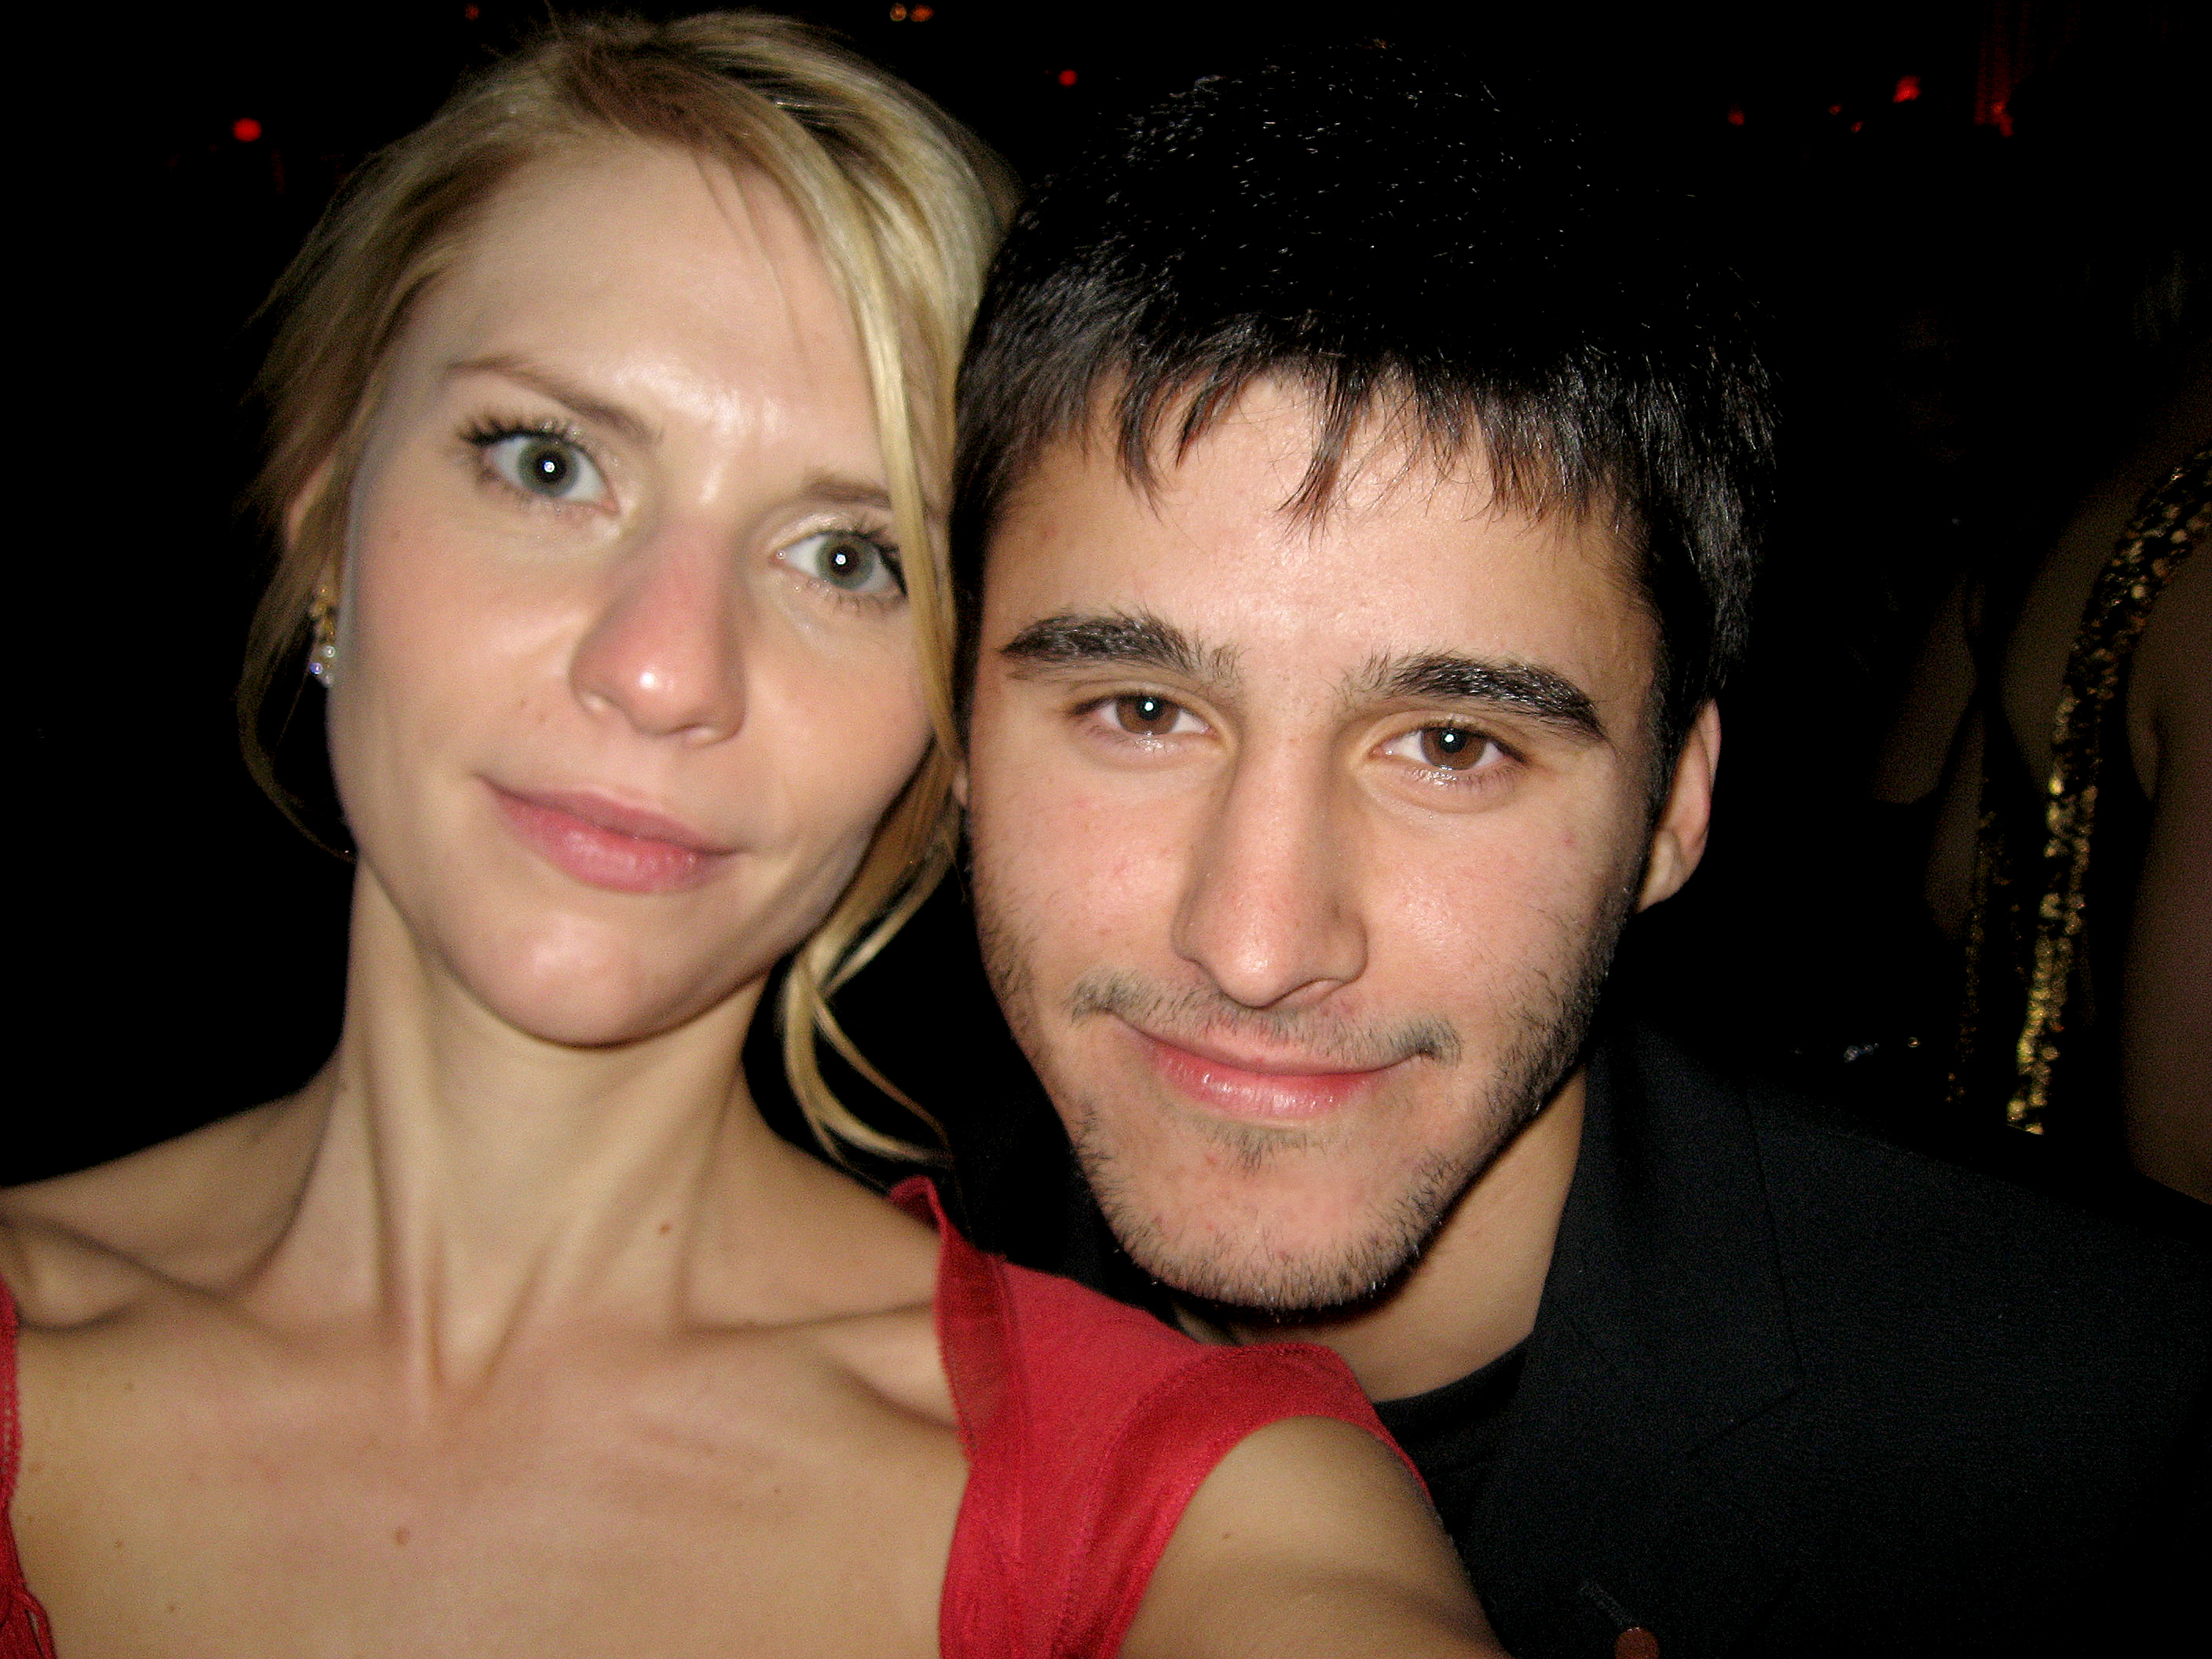 Actress Claire Danes (L) and producer Josh Wood attend the 15th Annual Screen Actors Guild Awards cocktail party held at the Shrine Auditorium on January 25, 2009 in Los Angeles, California.